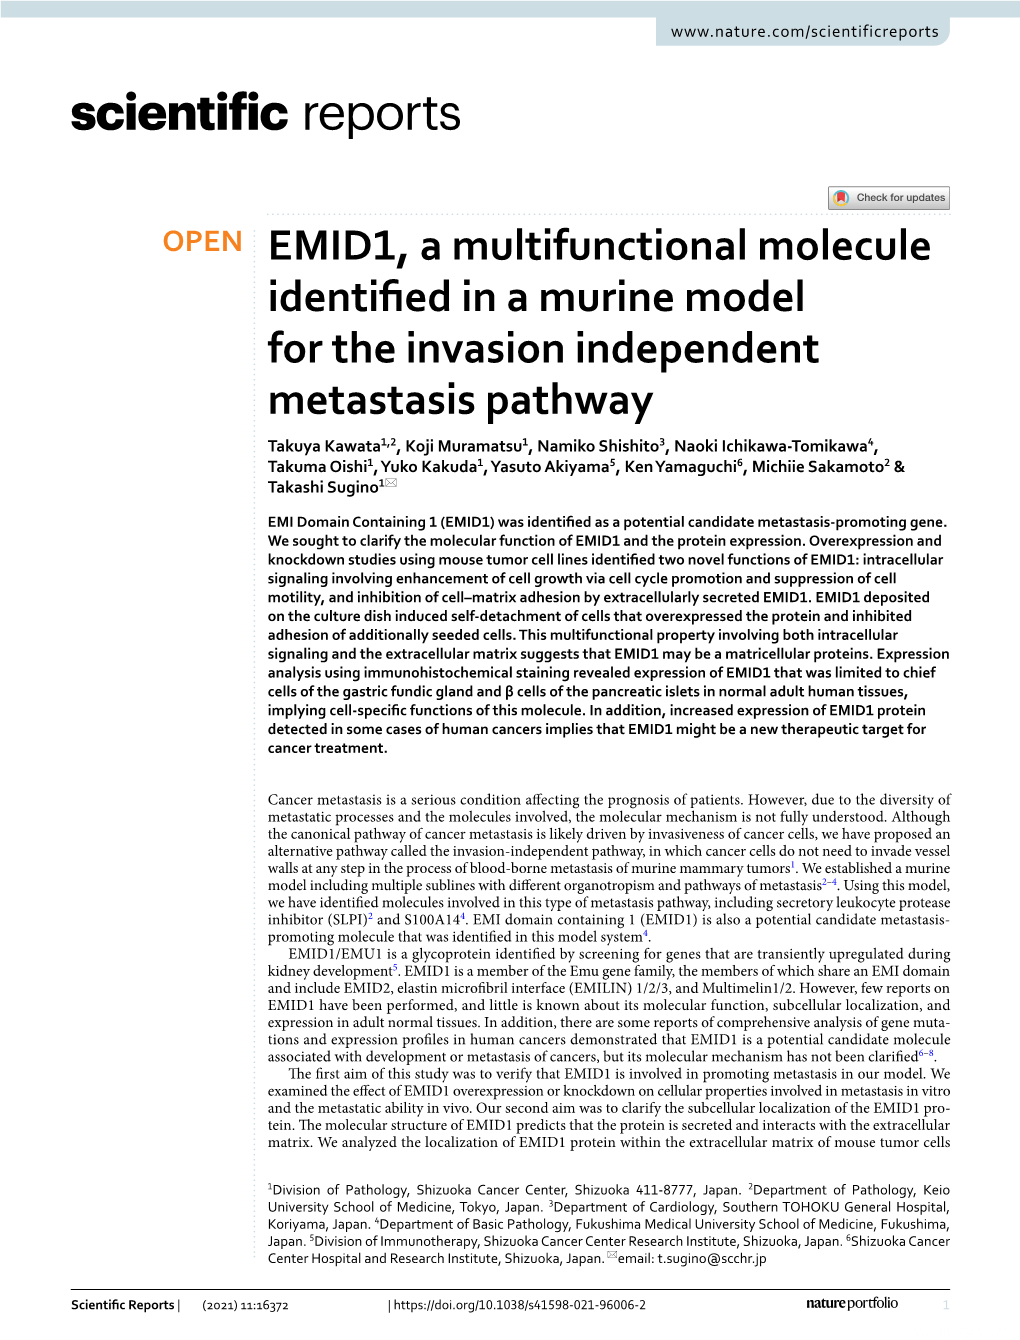 EMID1, a Multifunctional Molecule Identified in a Murine Model for The